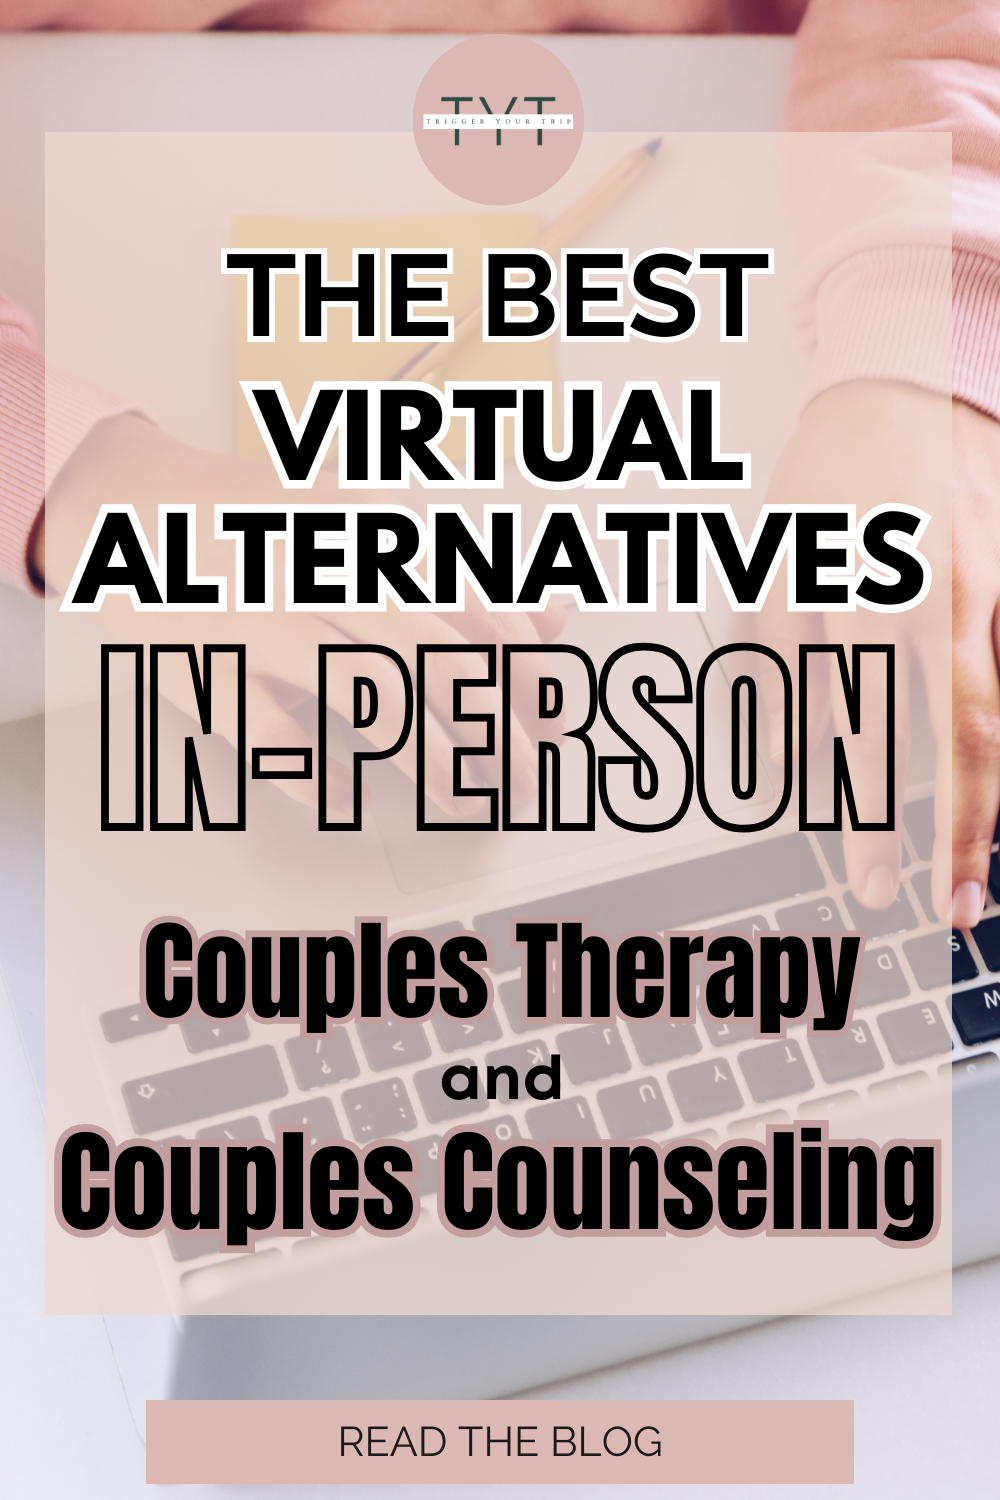 marriage counseling cost, counseling costs  and family therapy alternatives that cover couples counseling